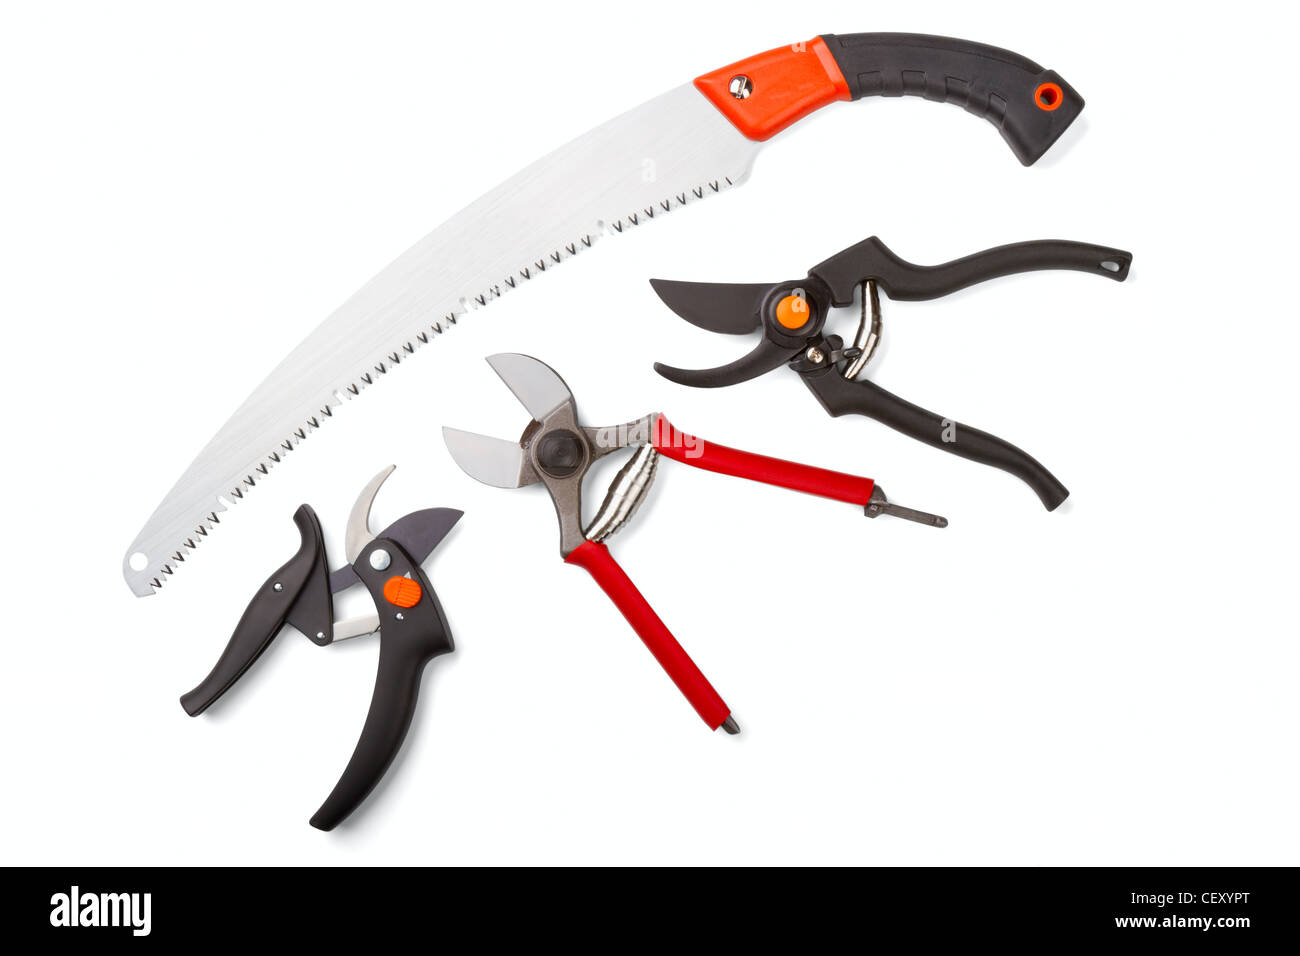 garden secateurs and hacksaw isolated on a white background Stock Photo